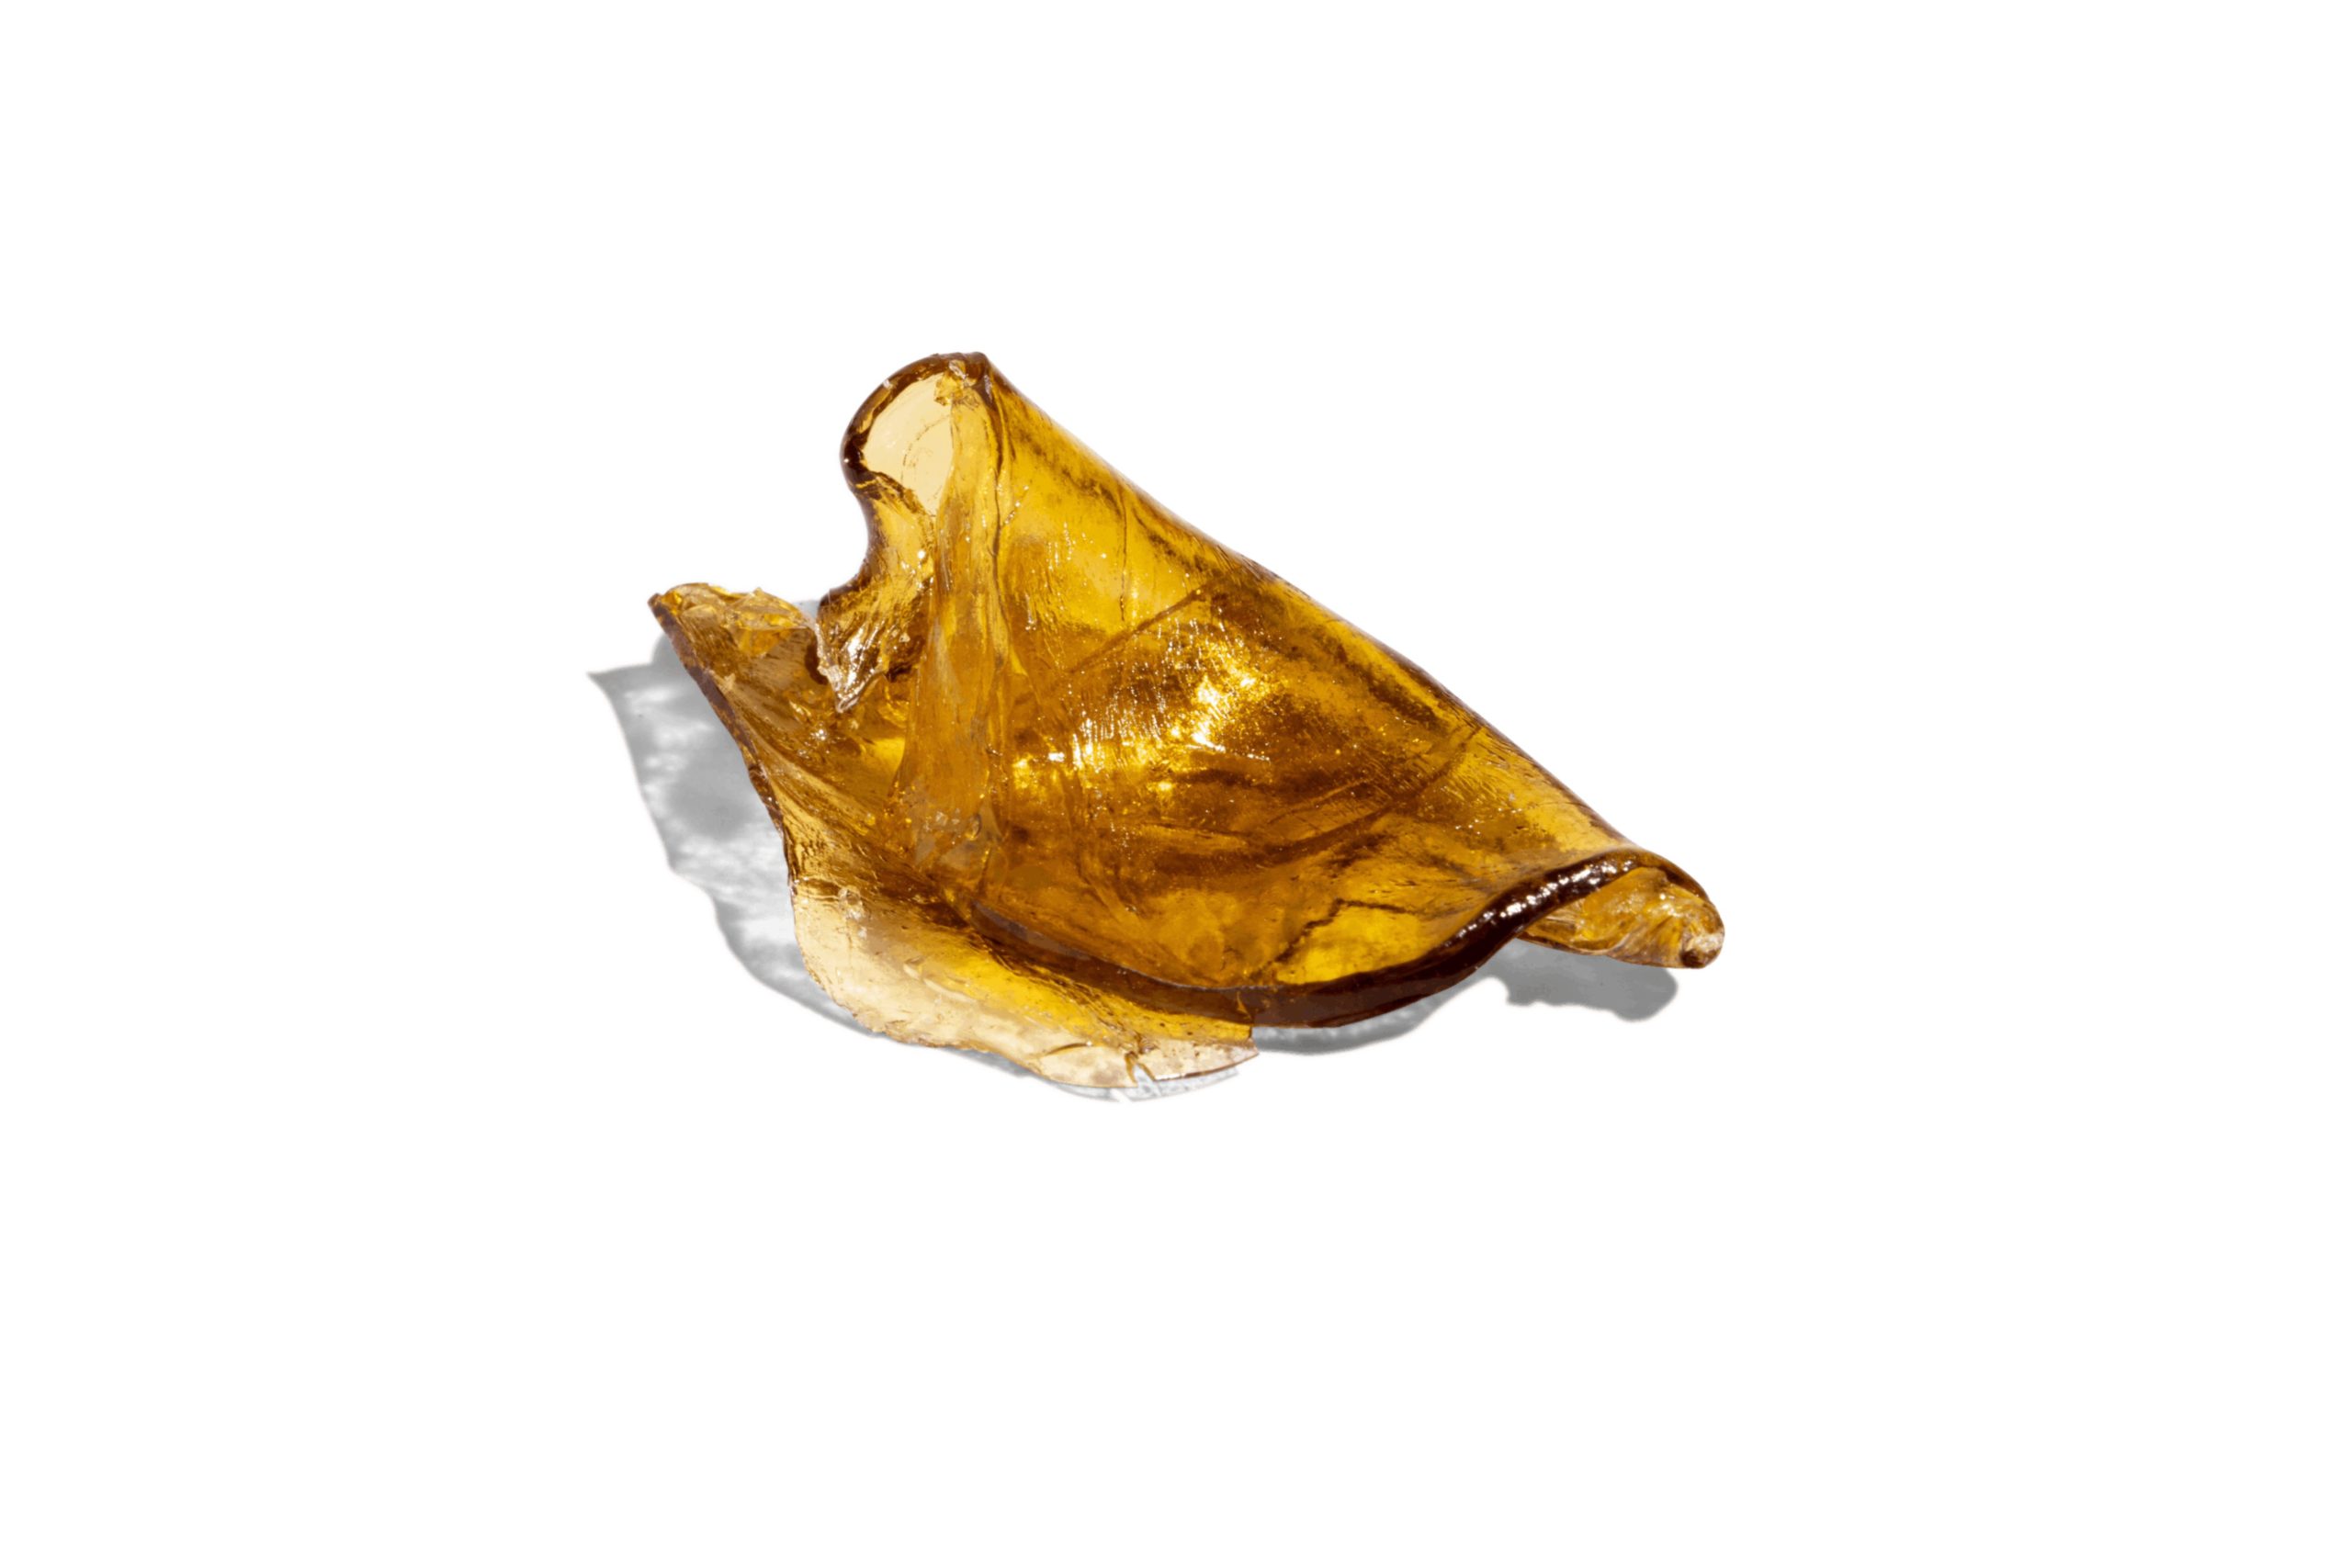 So whether you’re trying to buy lemon shatter or dried flower, you can easily order some from an online weed dispensary near you. 